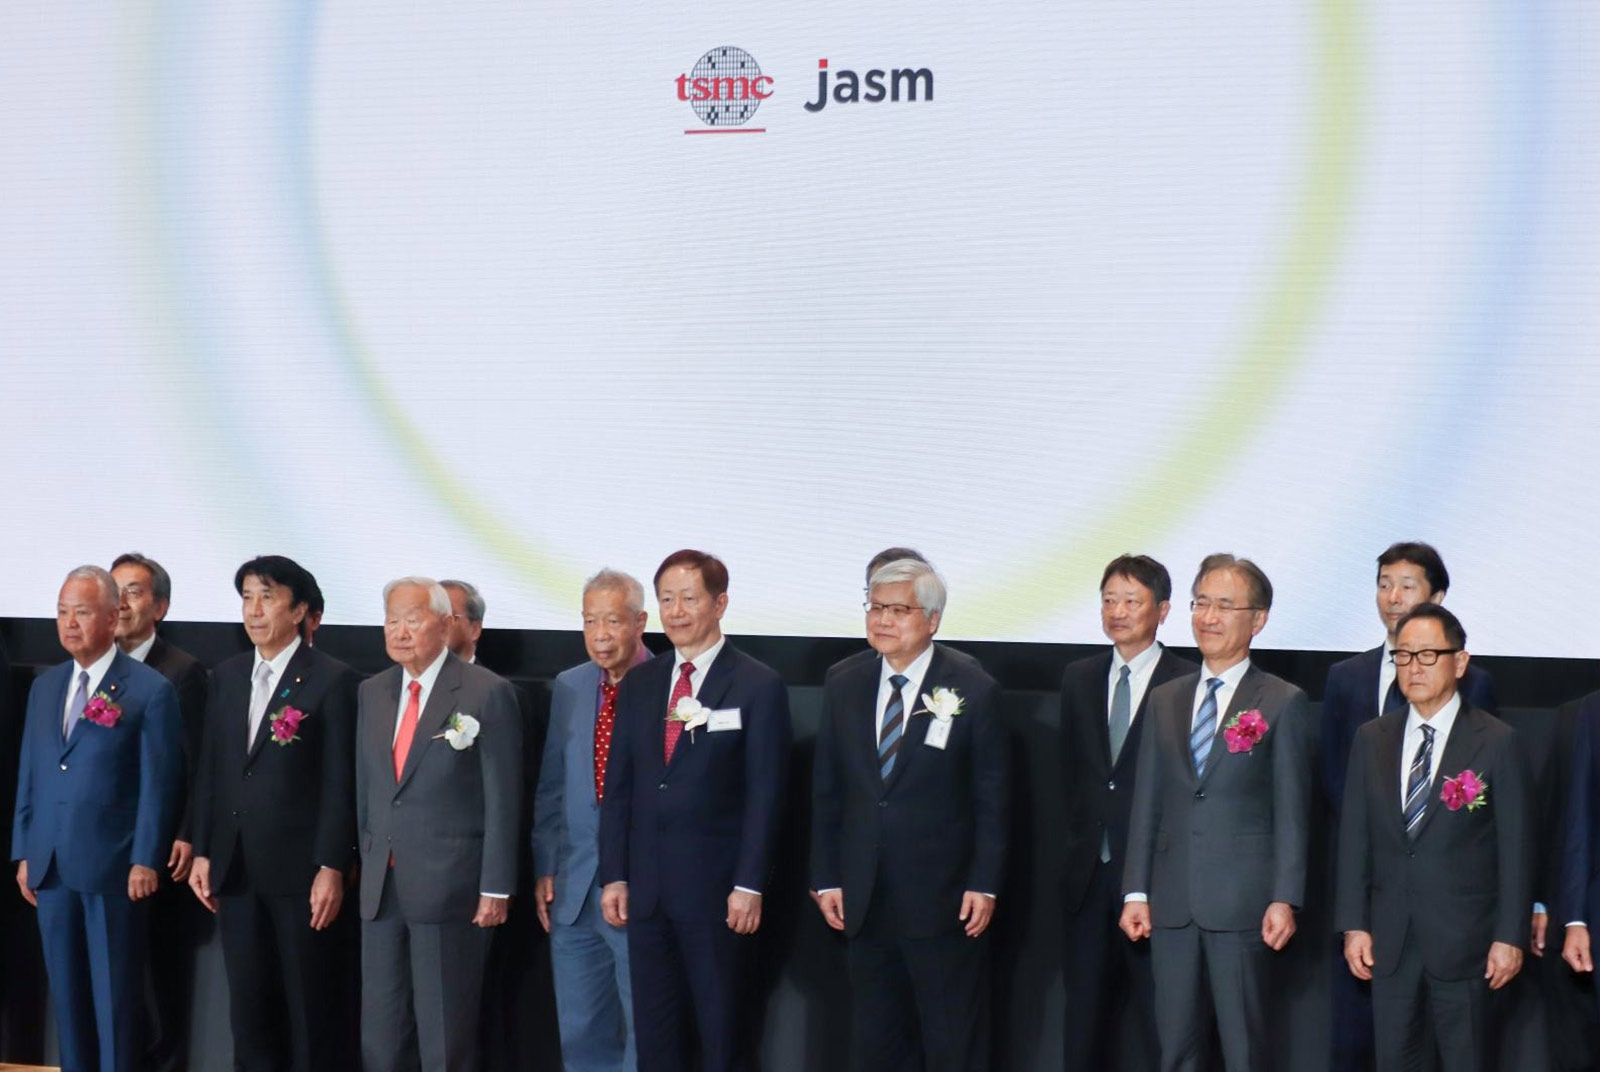 JASM grand opening: Can it restore semiconductor glory in Japan?